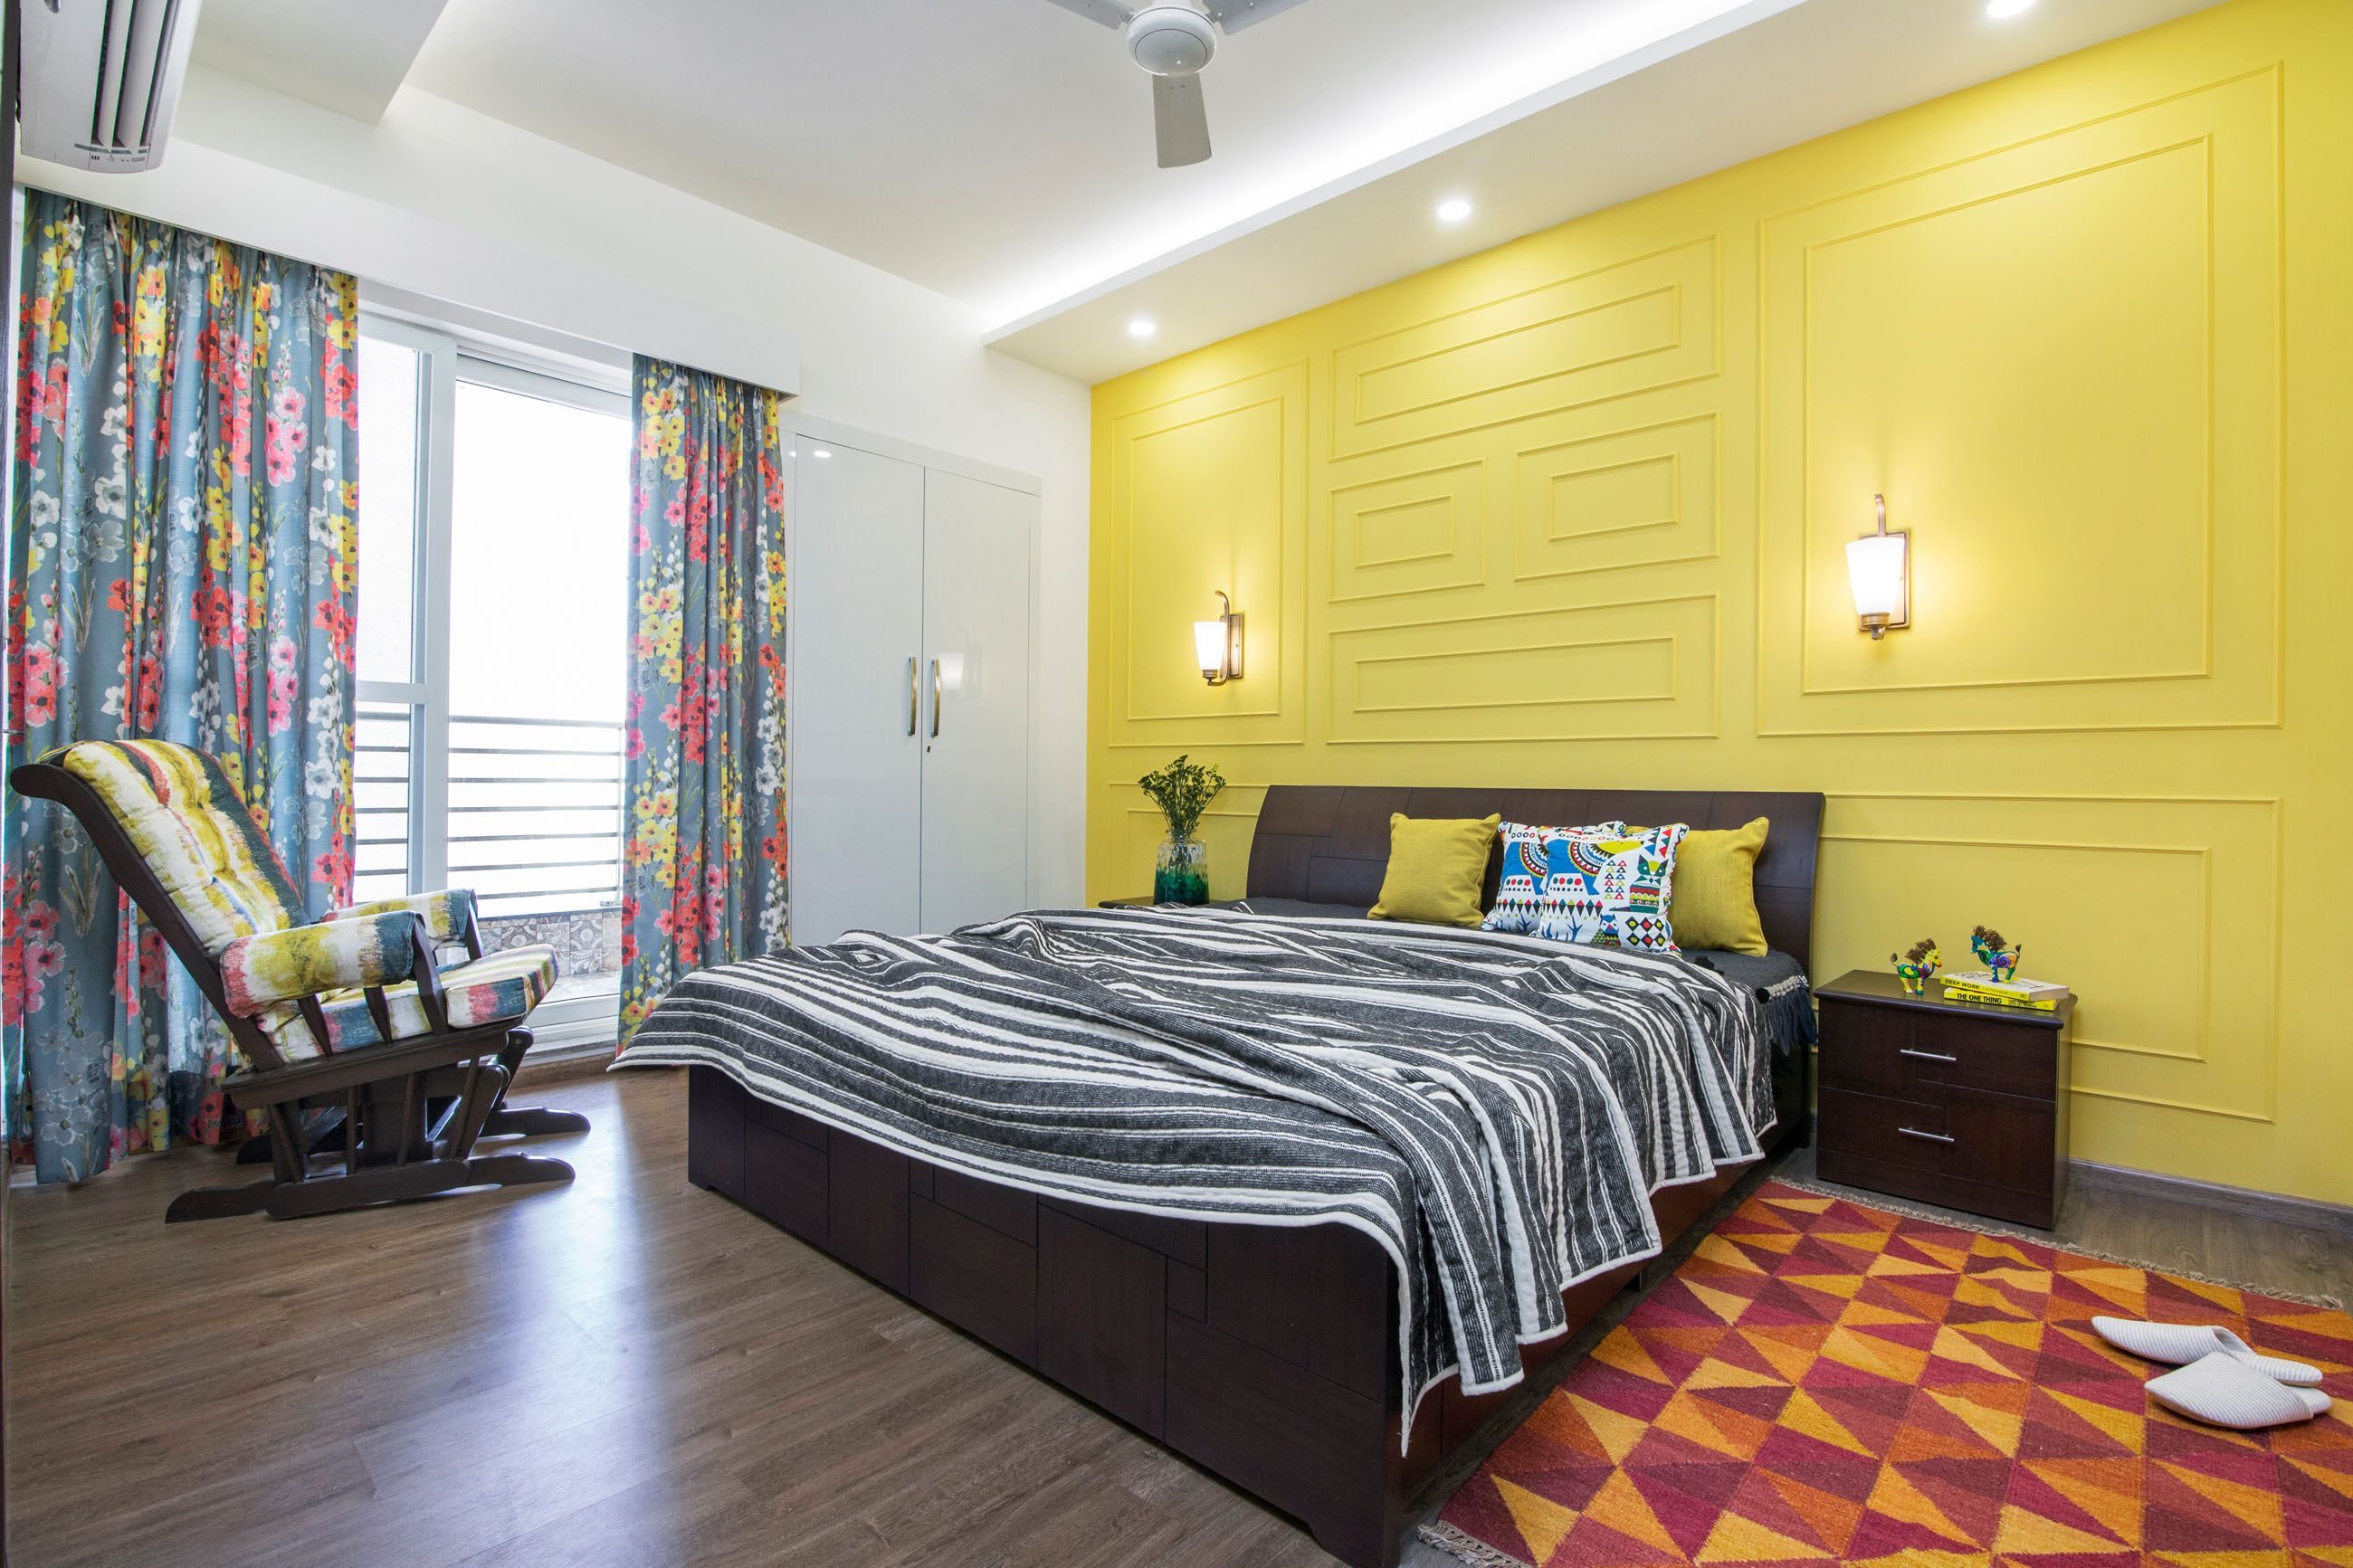 Modern Guest Room Design With Yellow Wall Paint And Trims